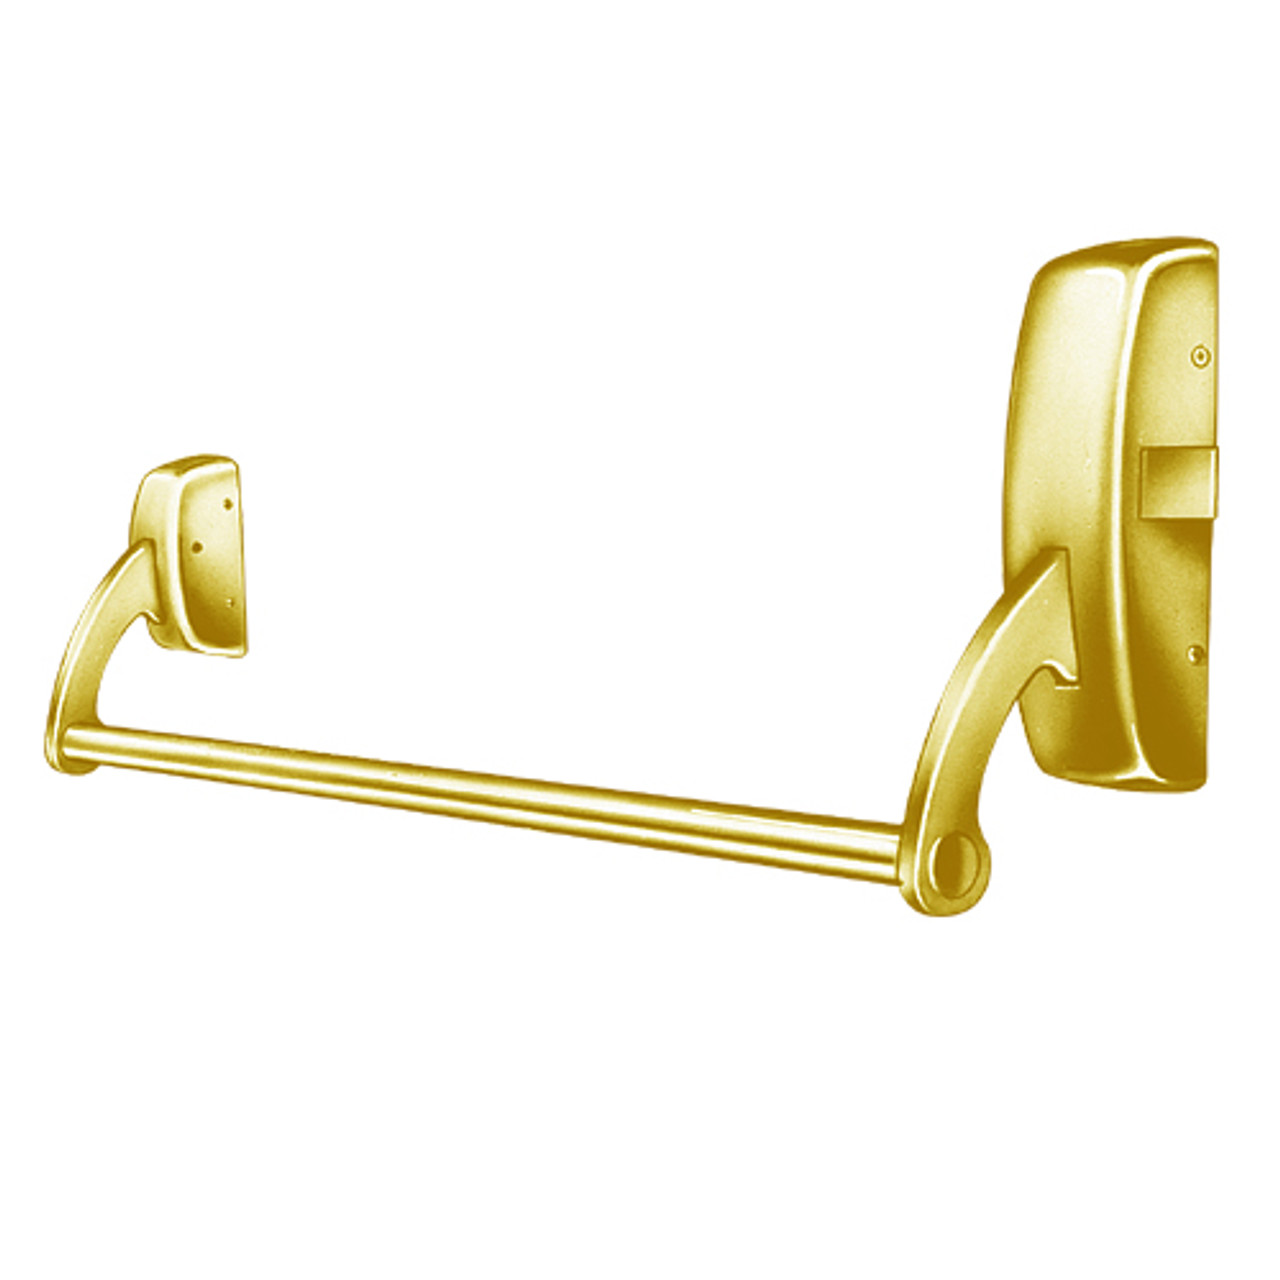 9810-RHR-03 Sargent 90 Series Exit Only Rim Exit Device in Bright Brass